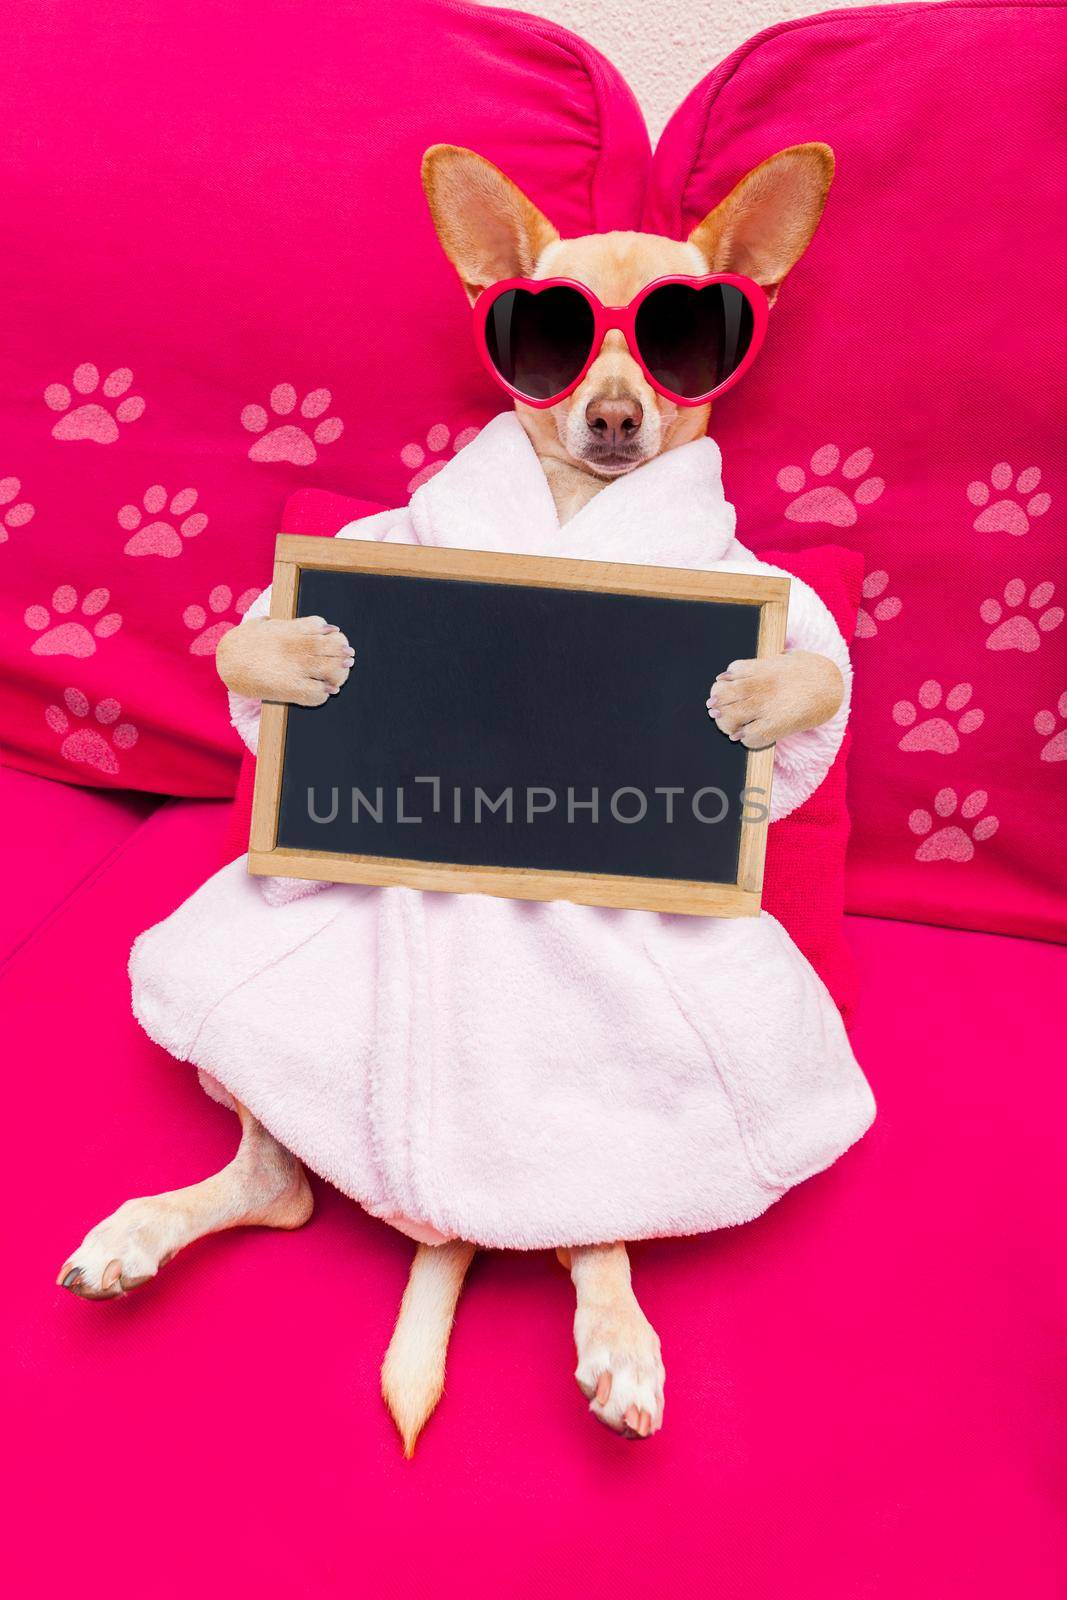 chihuahua dog relaxing  and lying, in   spa wellness center ,wearing a  bathrobe and funny sunglasses with banner blackboard placard